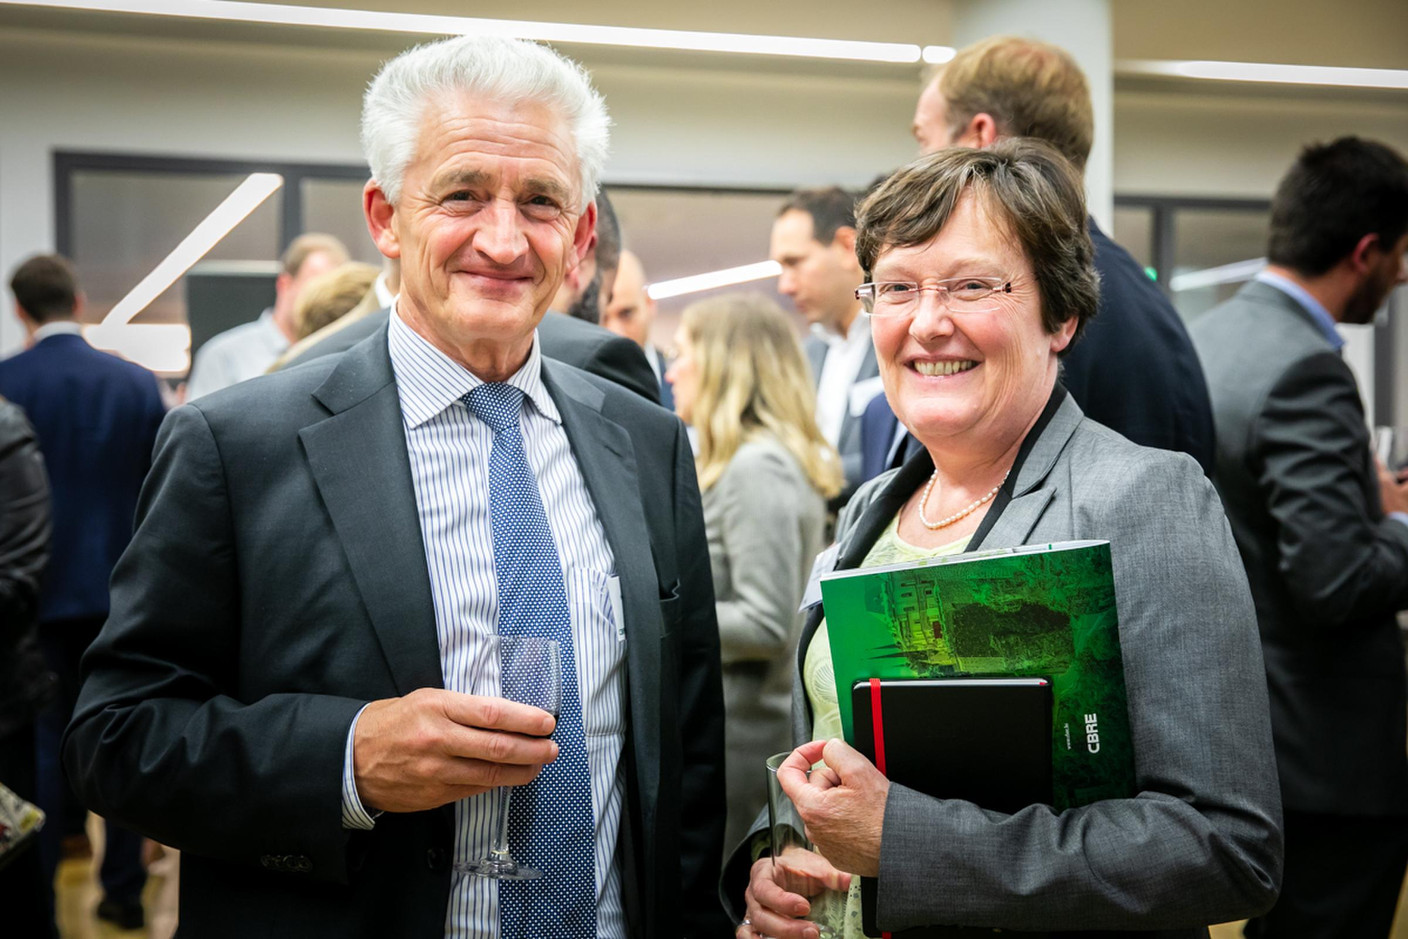 Herbert Weynand (Group Wagner) et Astrid Schlesser (Banque de Luxembourg) (Photos: Vincent Remy pour CBRE)